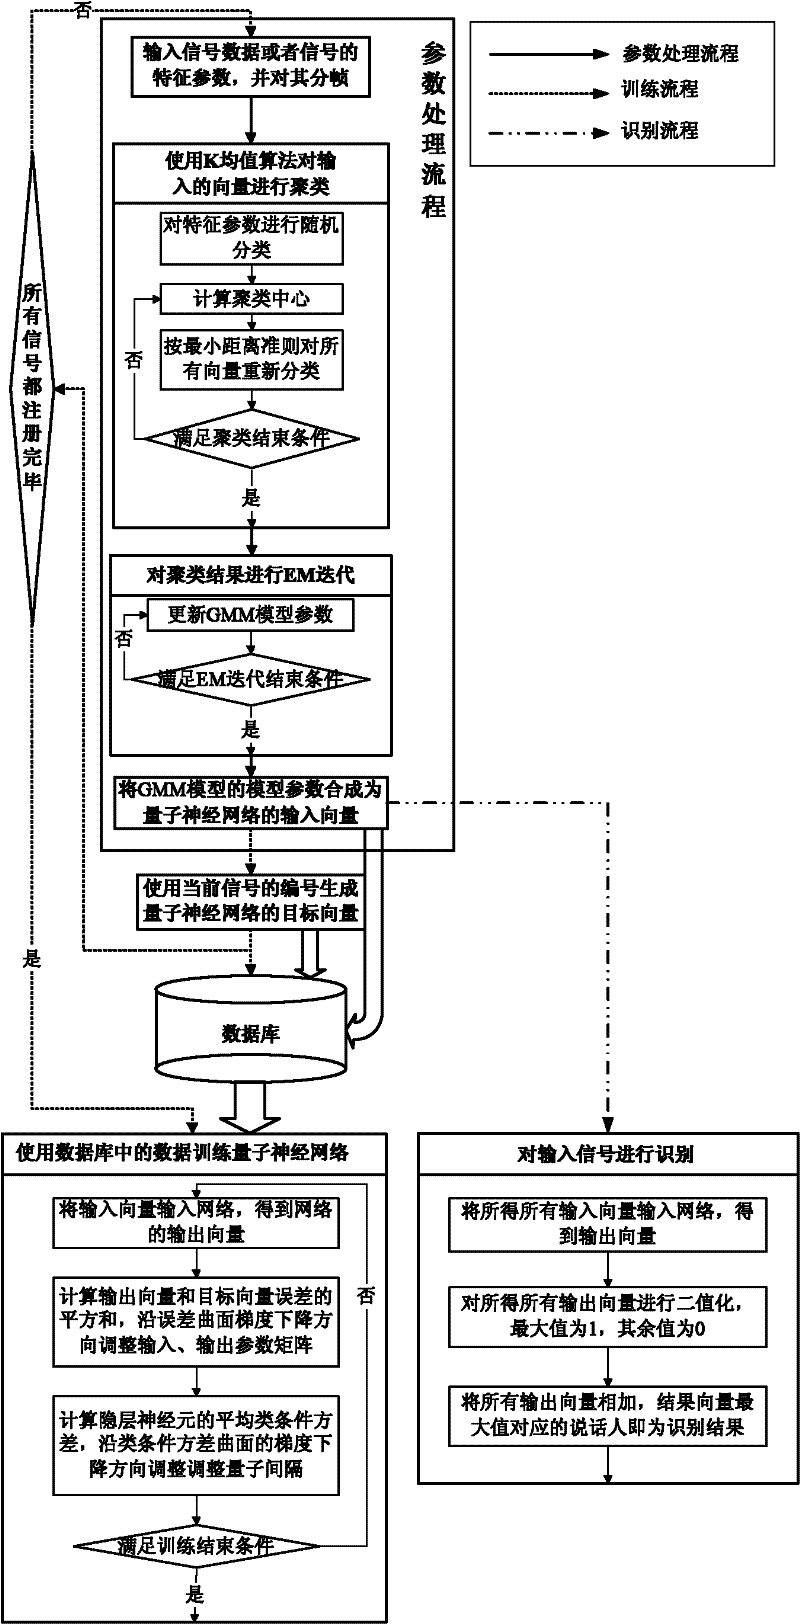 Speaker recognition method combining Gaussian mixture model and quantum neural network